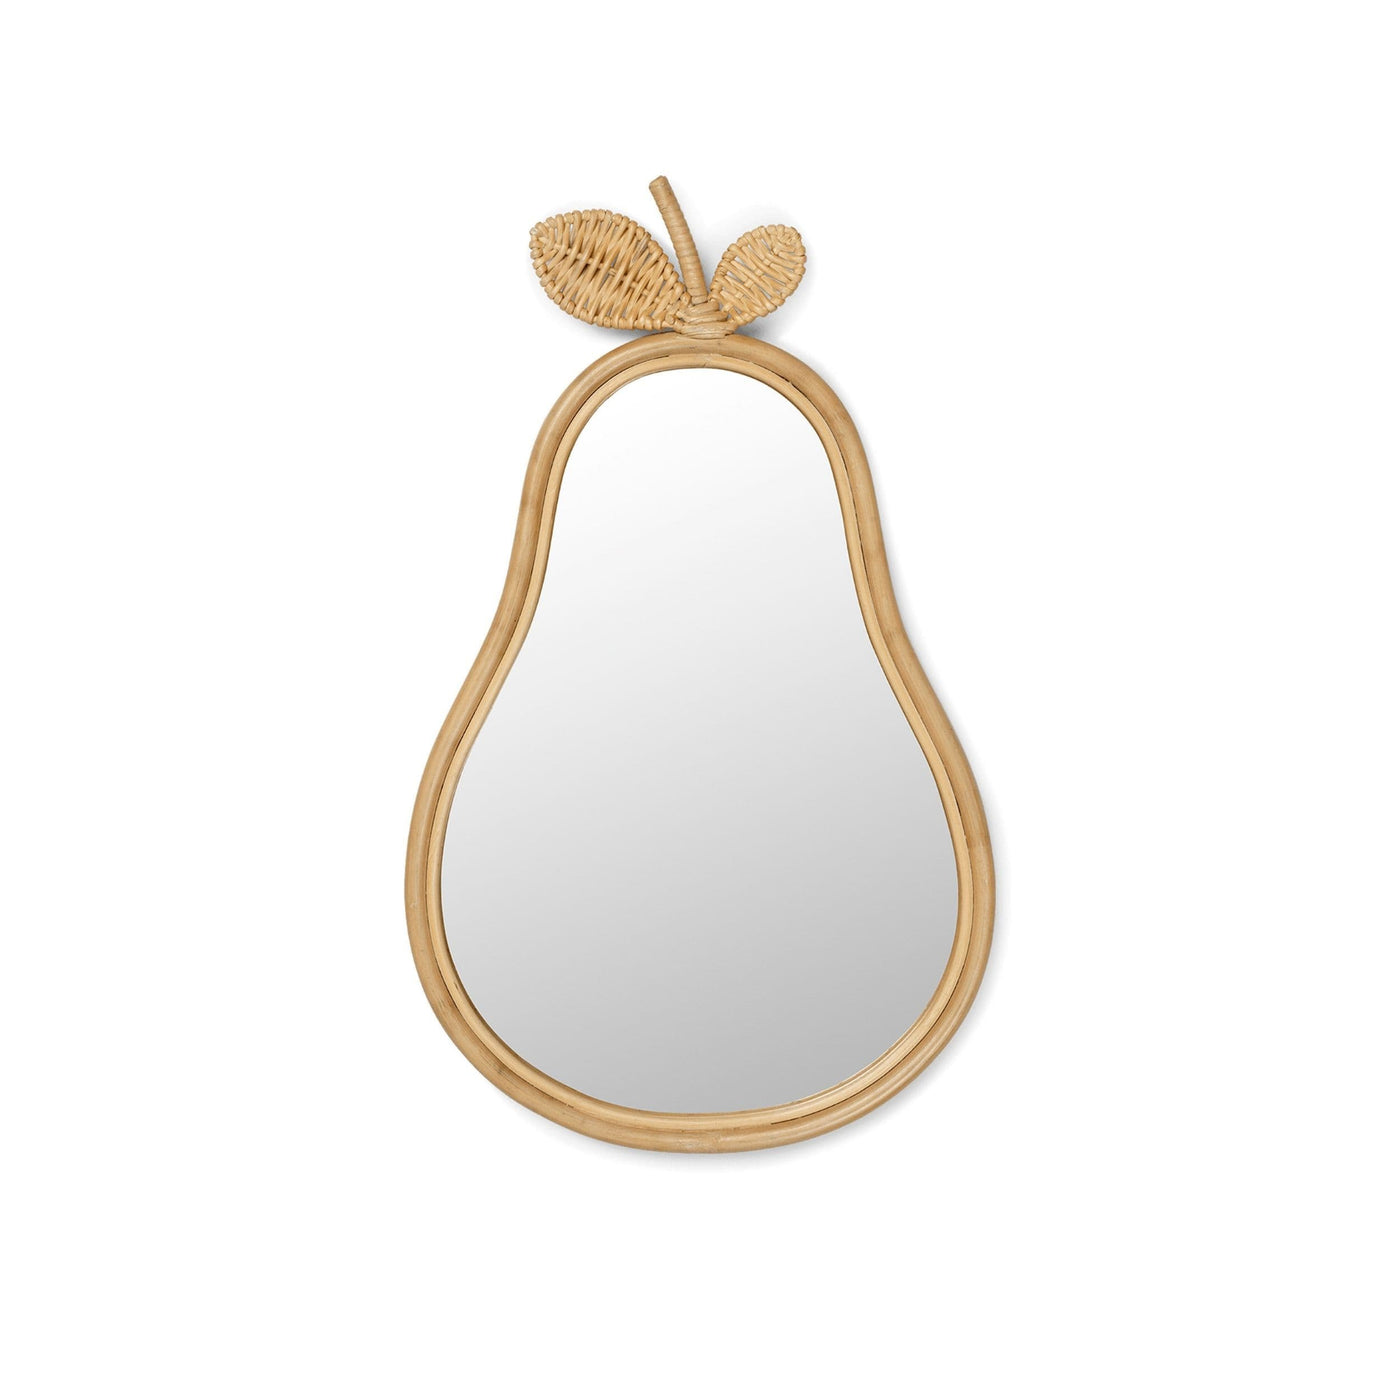 Ferm Livings petite pear mirror has a bamboo & rattan frame. Bring a natural & playful touch to a kids bedroom. Free UK delivery from someday designs. 